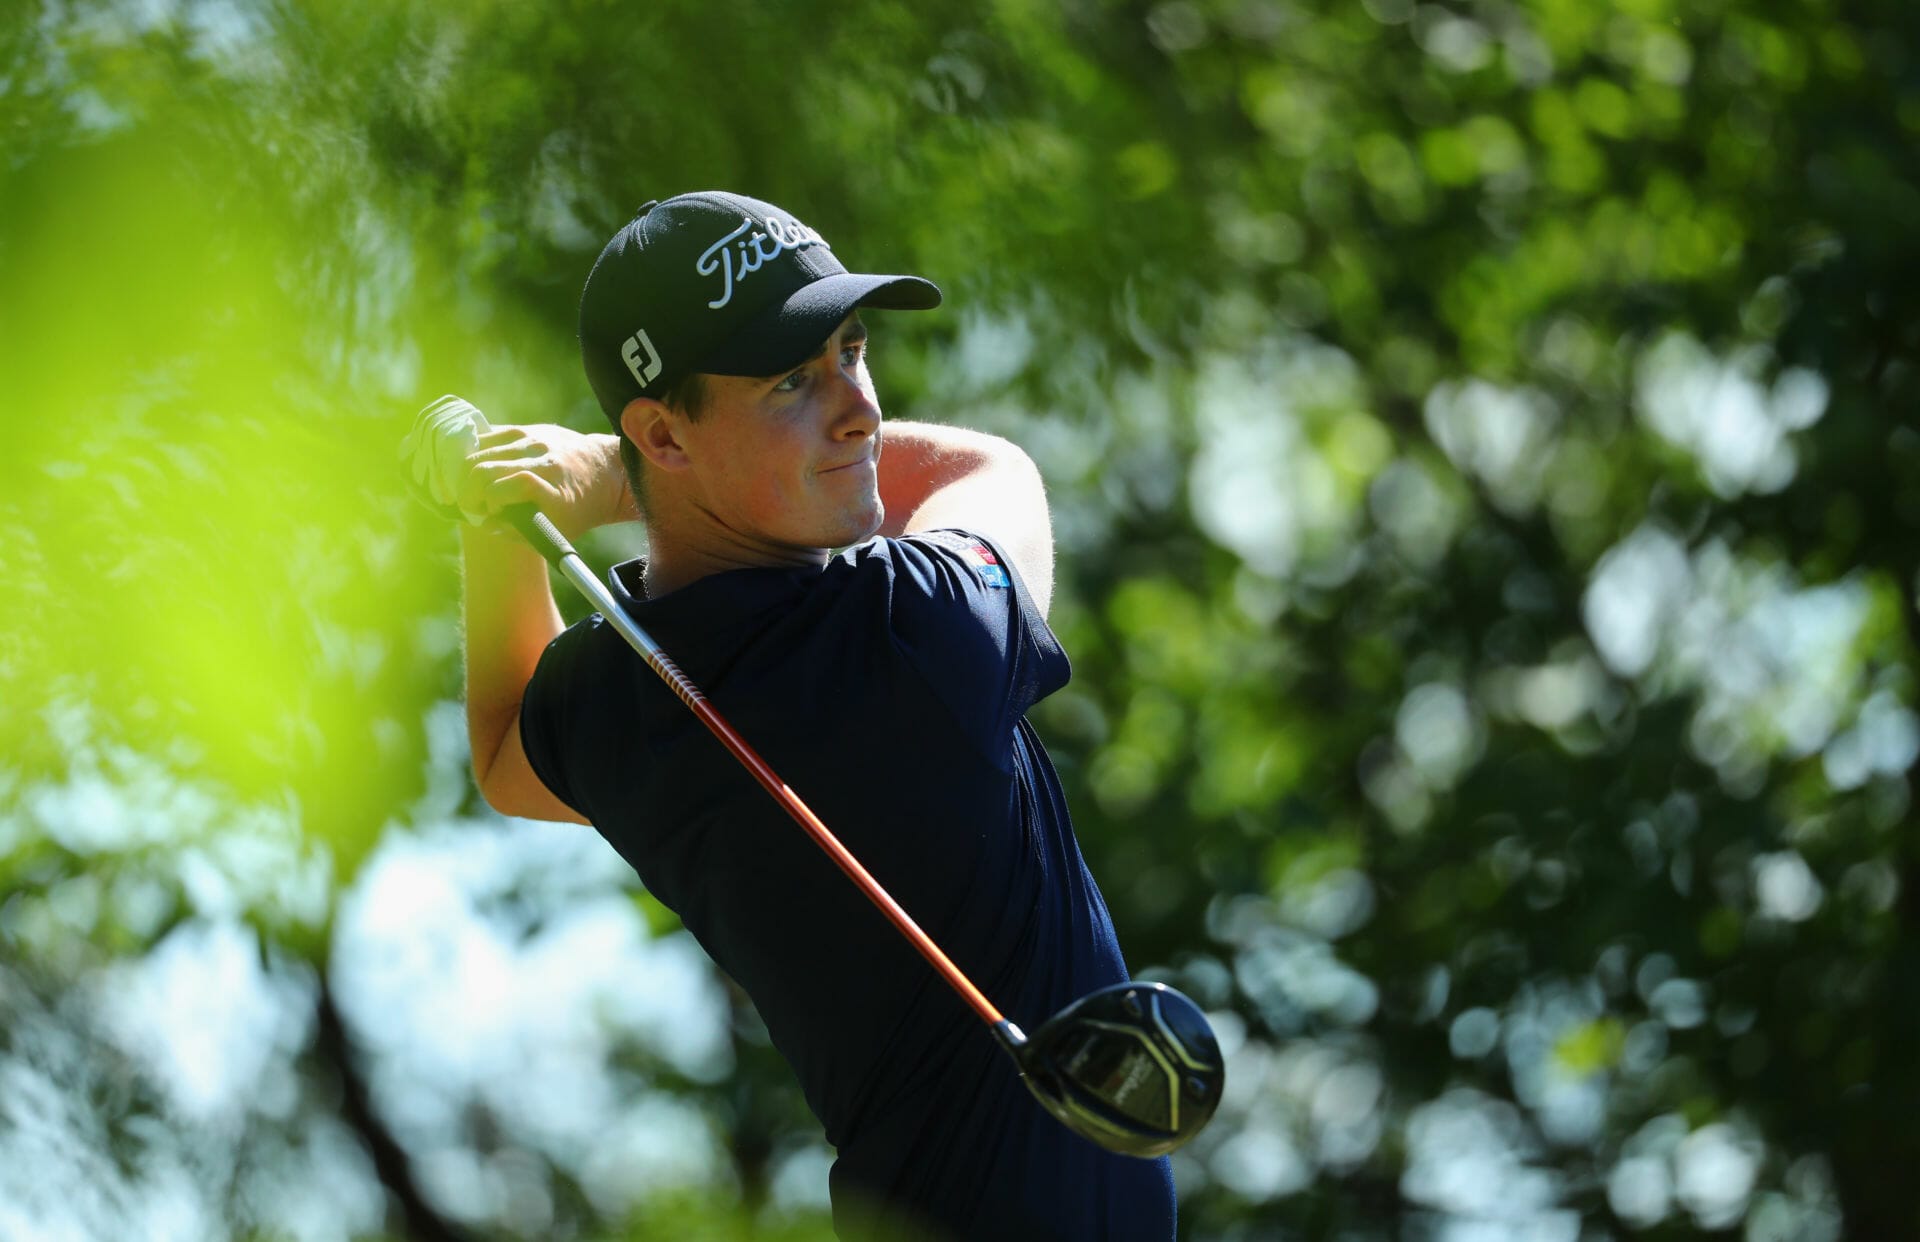 Irish trio get back to action at the Alps Tour Gosser Open